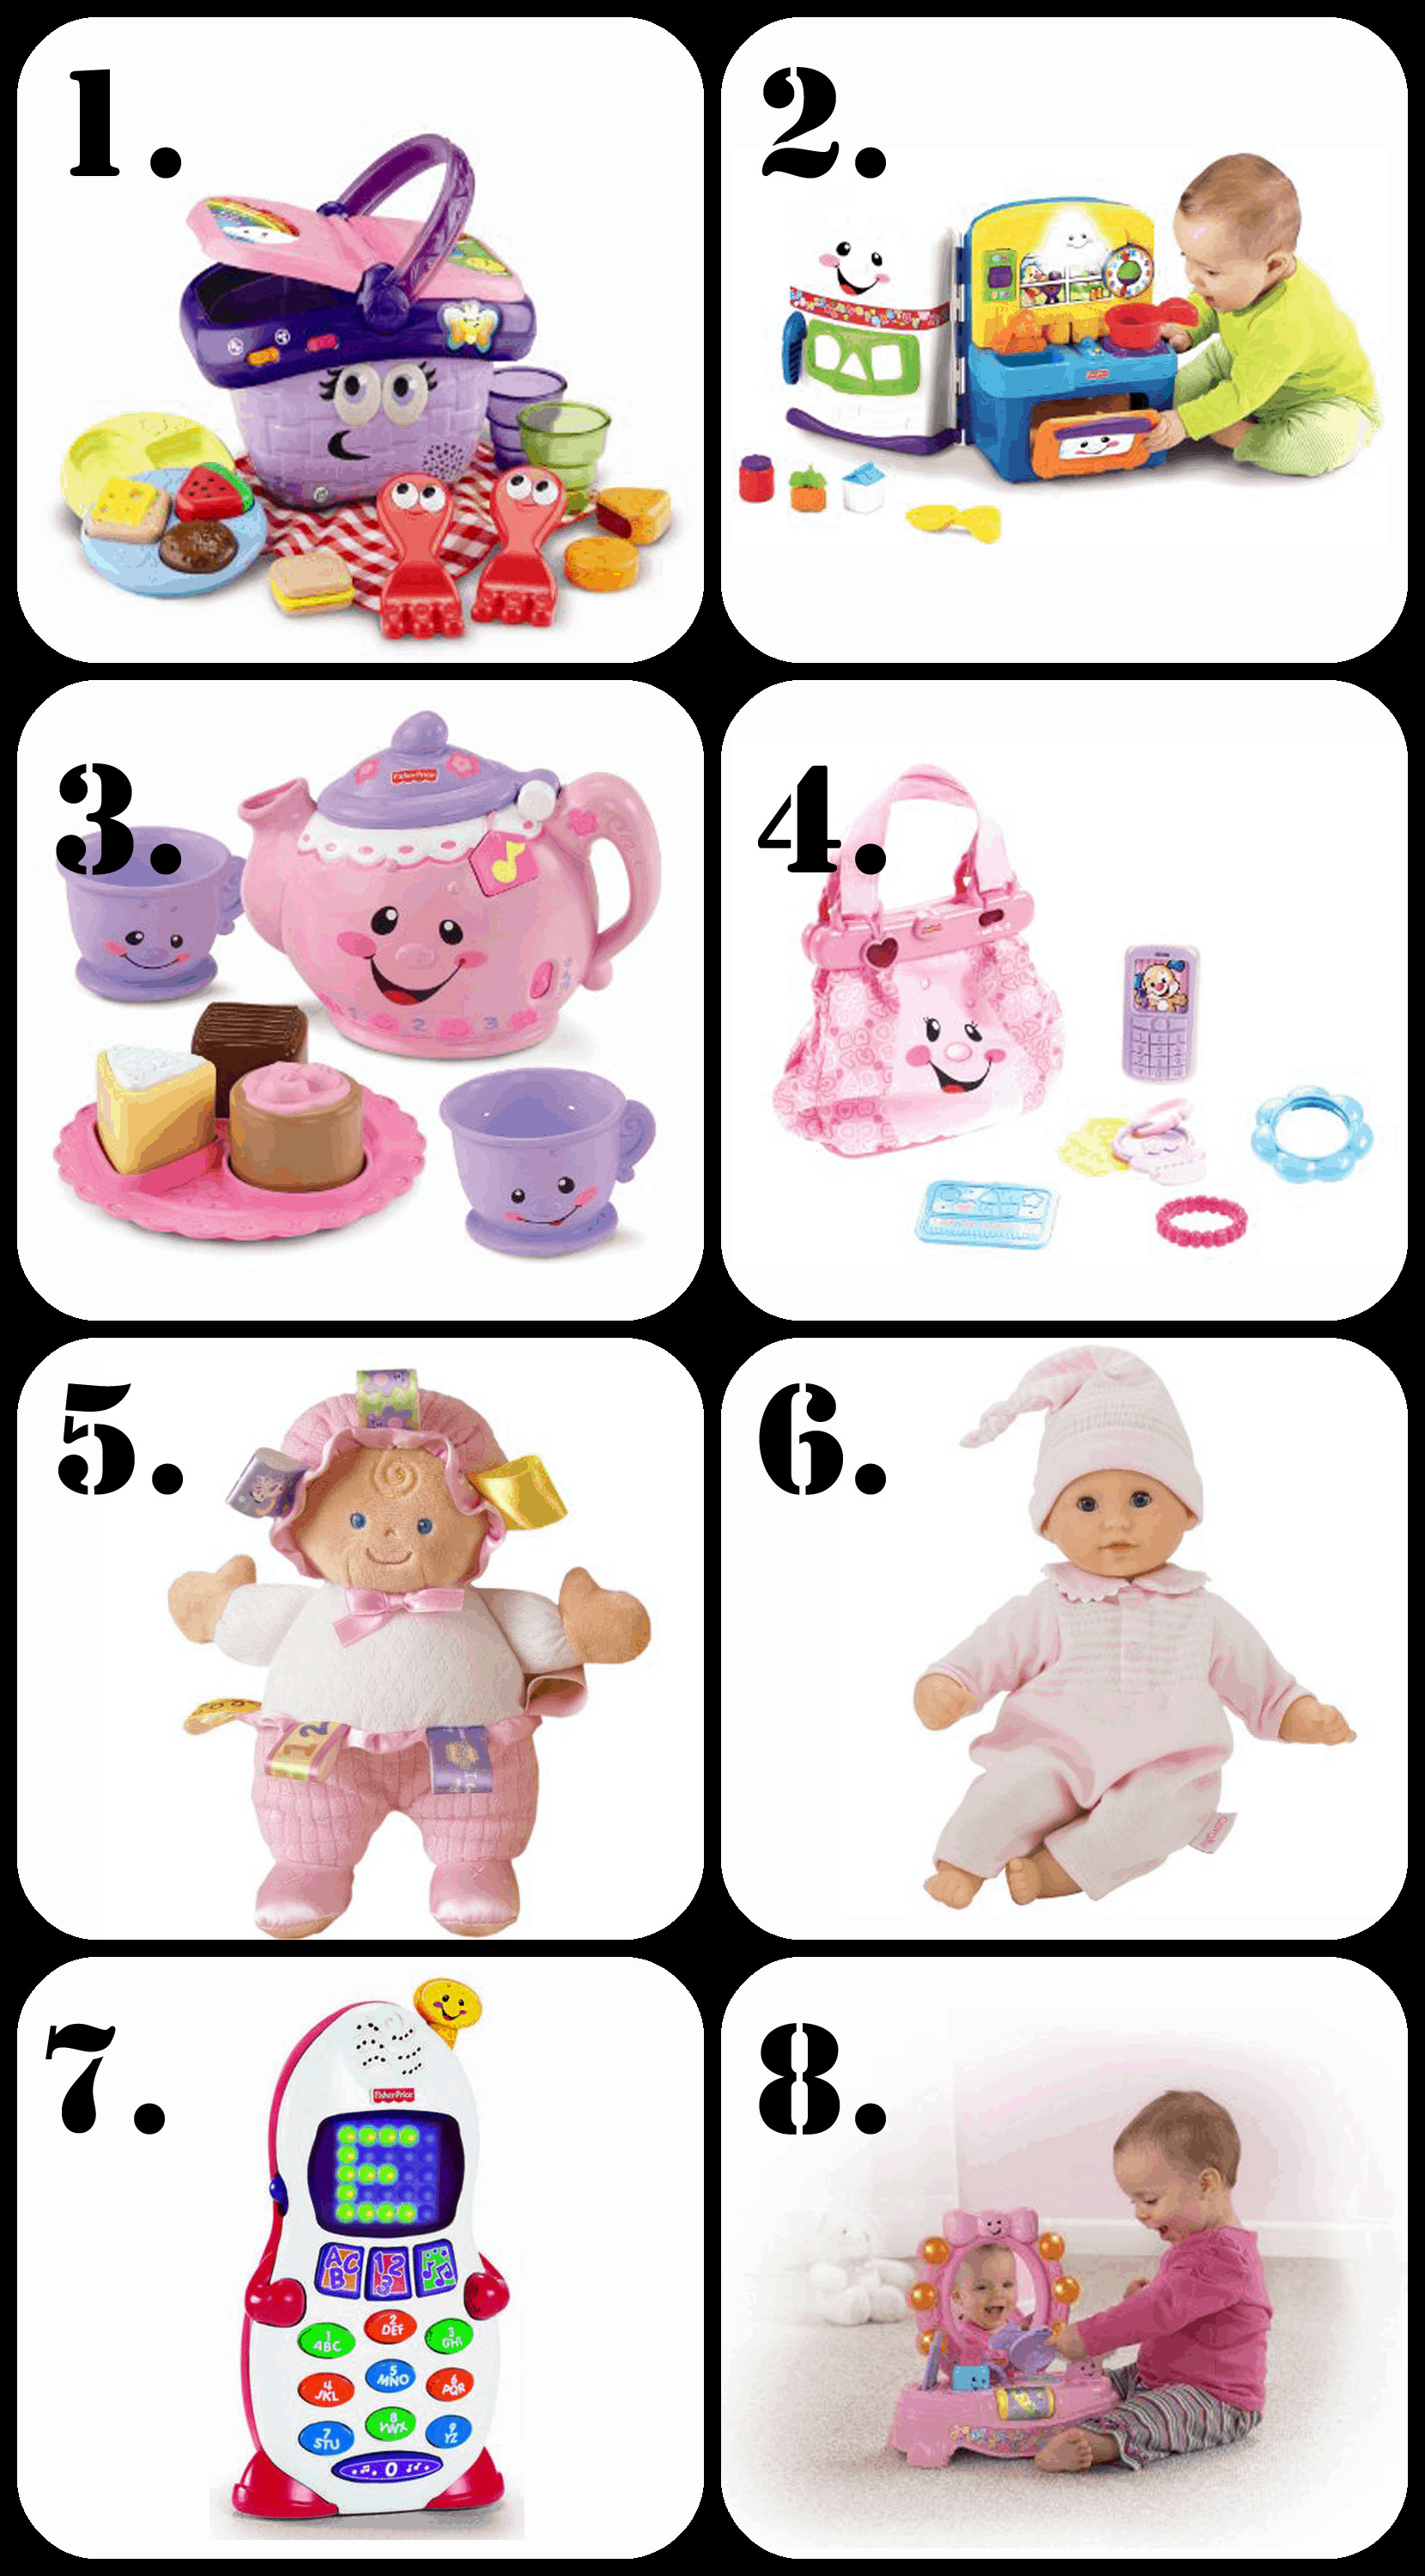 Birthday Gift Ideas For One Year Old Baby Girl
 The Ultimate List of Gift Ideas for a 1 Year Old Girl